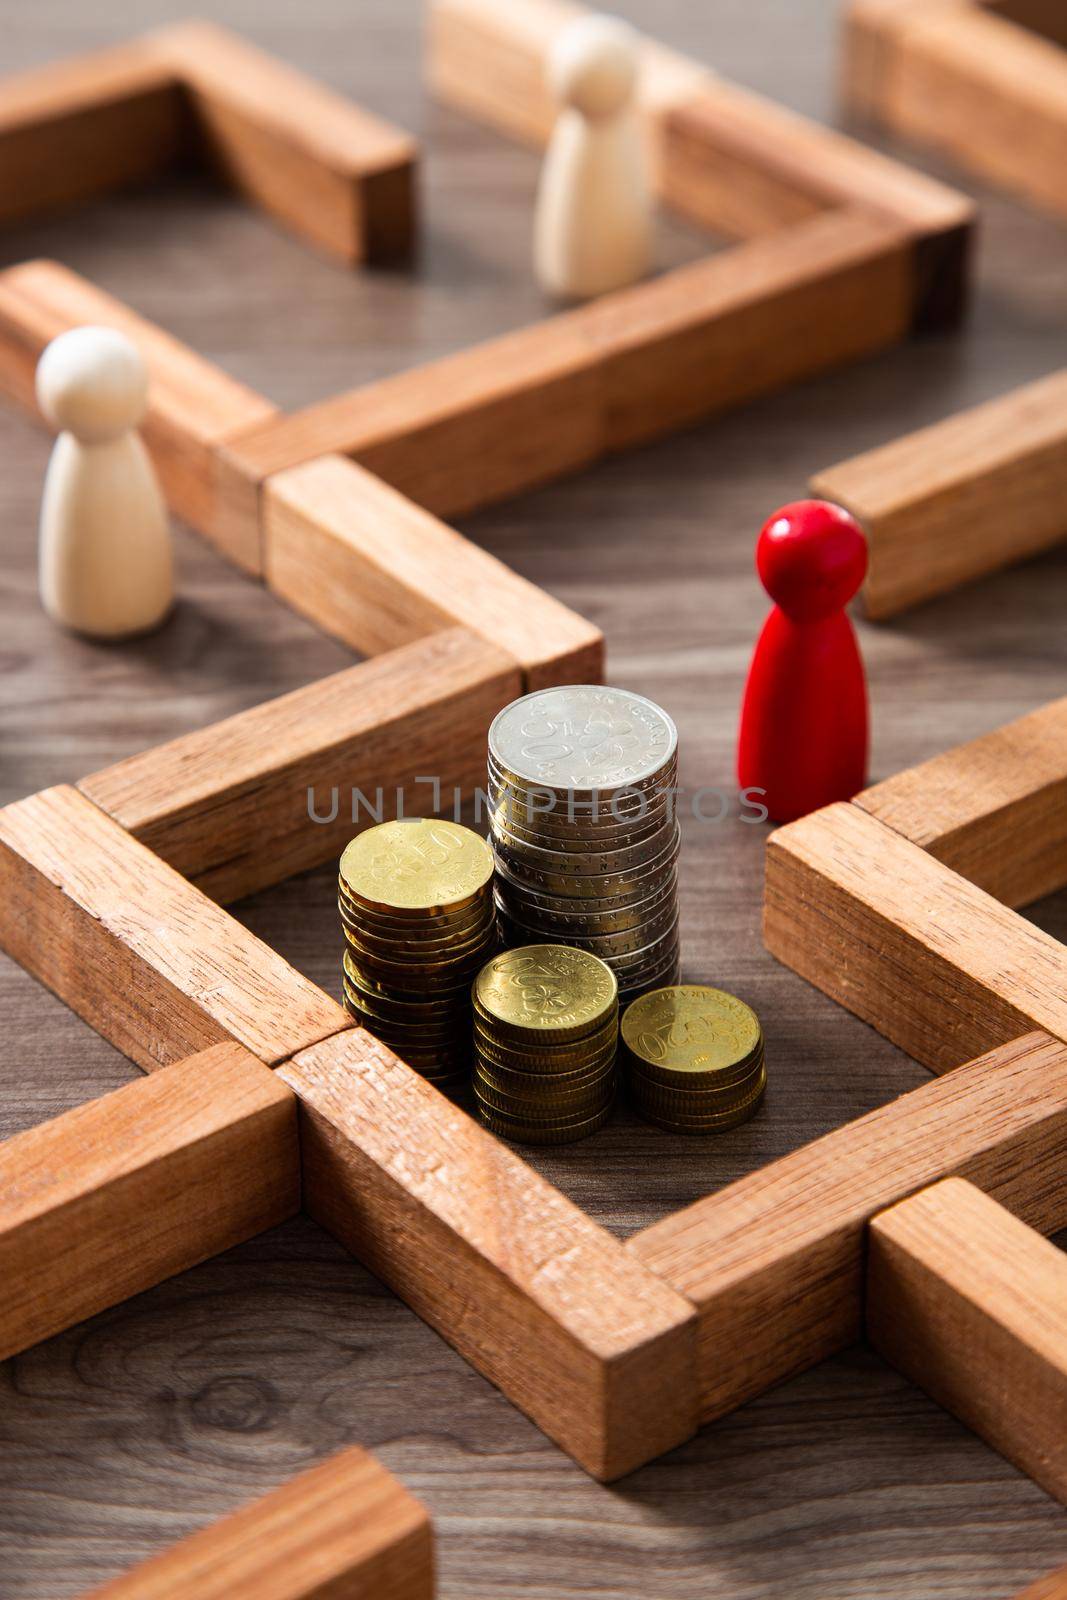 Group of coins heaps in the maze game built by wood blocks, find a way to money resource, business budget, making money concept